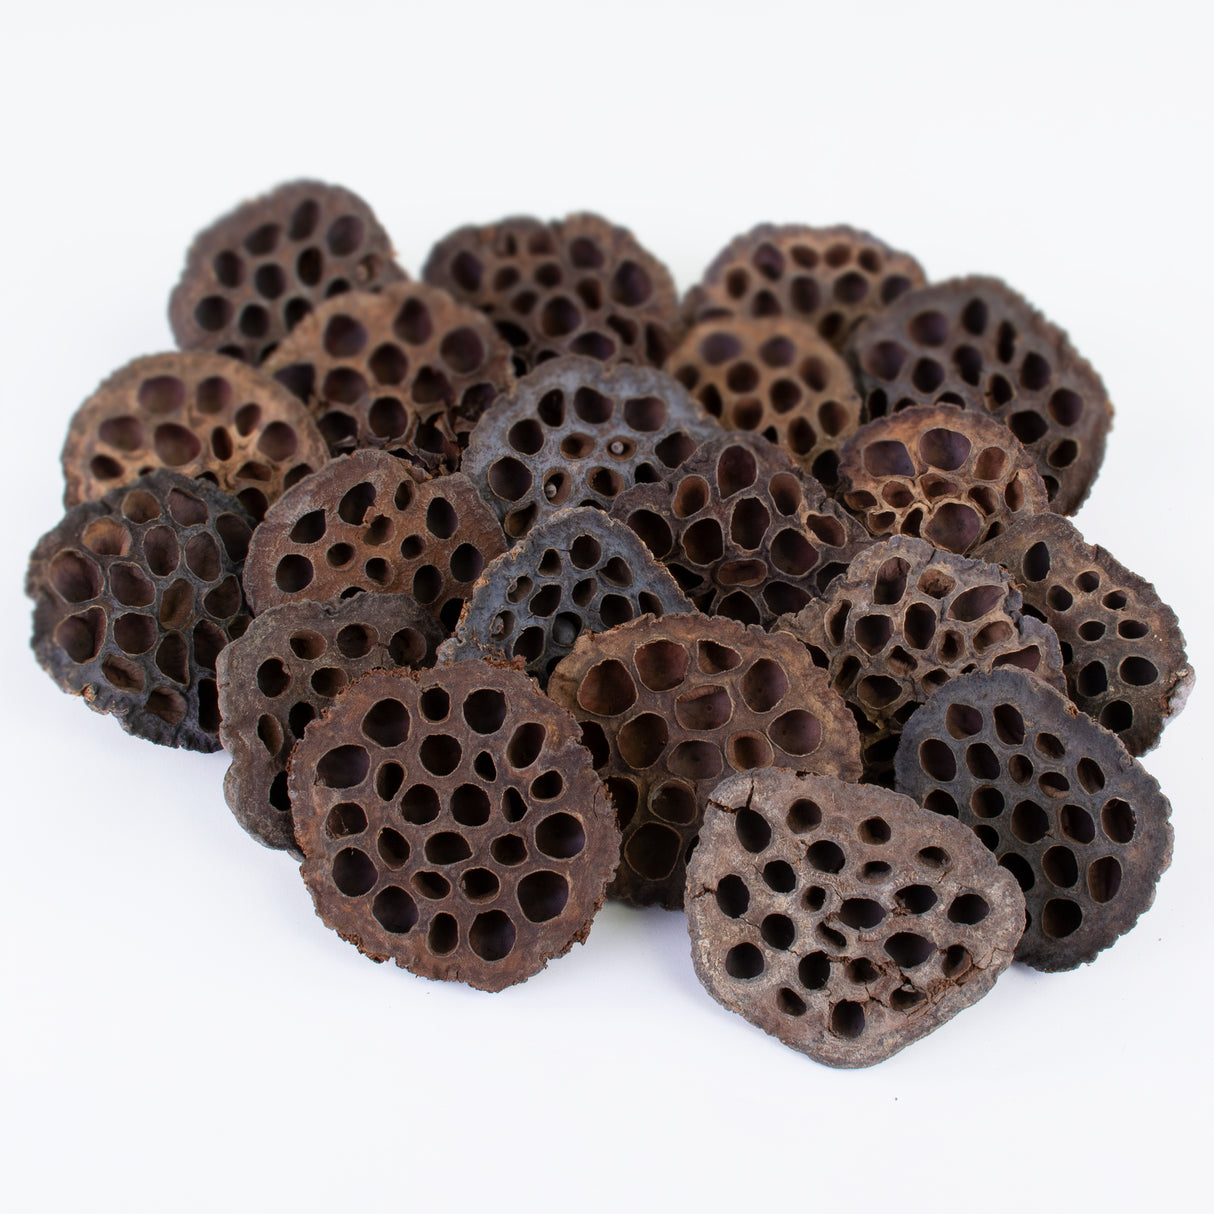 This image shows lotus seed heads on a white background